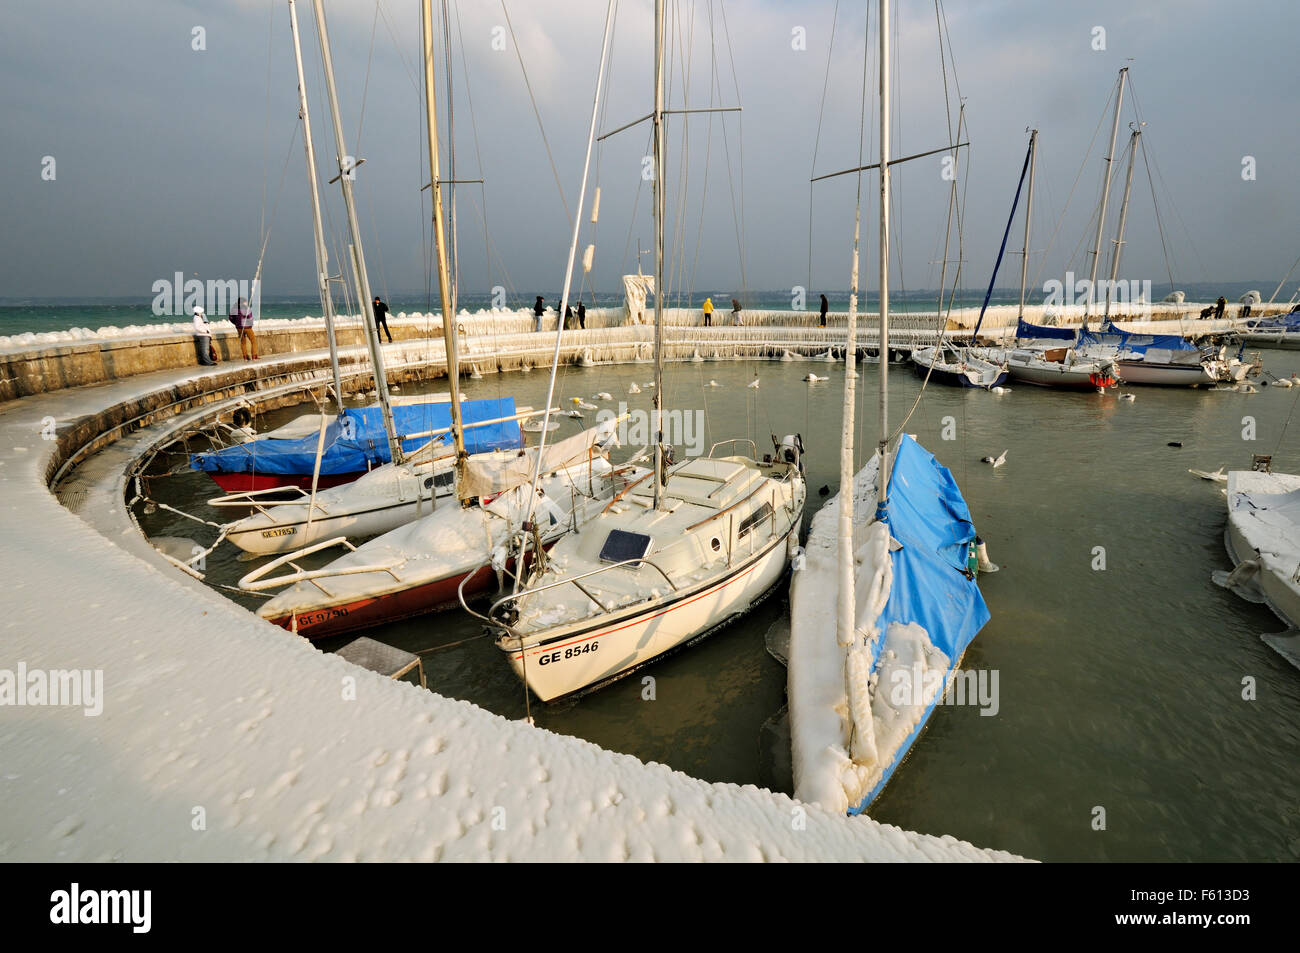 Boats trapped in ice at Port Choiseul during the February 2012 European cold wave, Versoix, Canton of Geneva, Switzerland Stock Photo